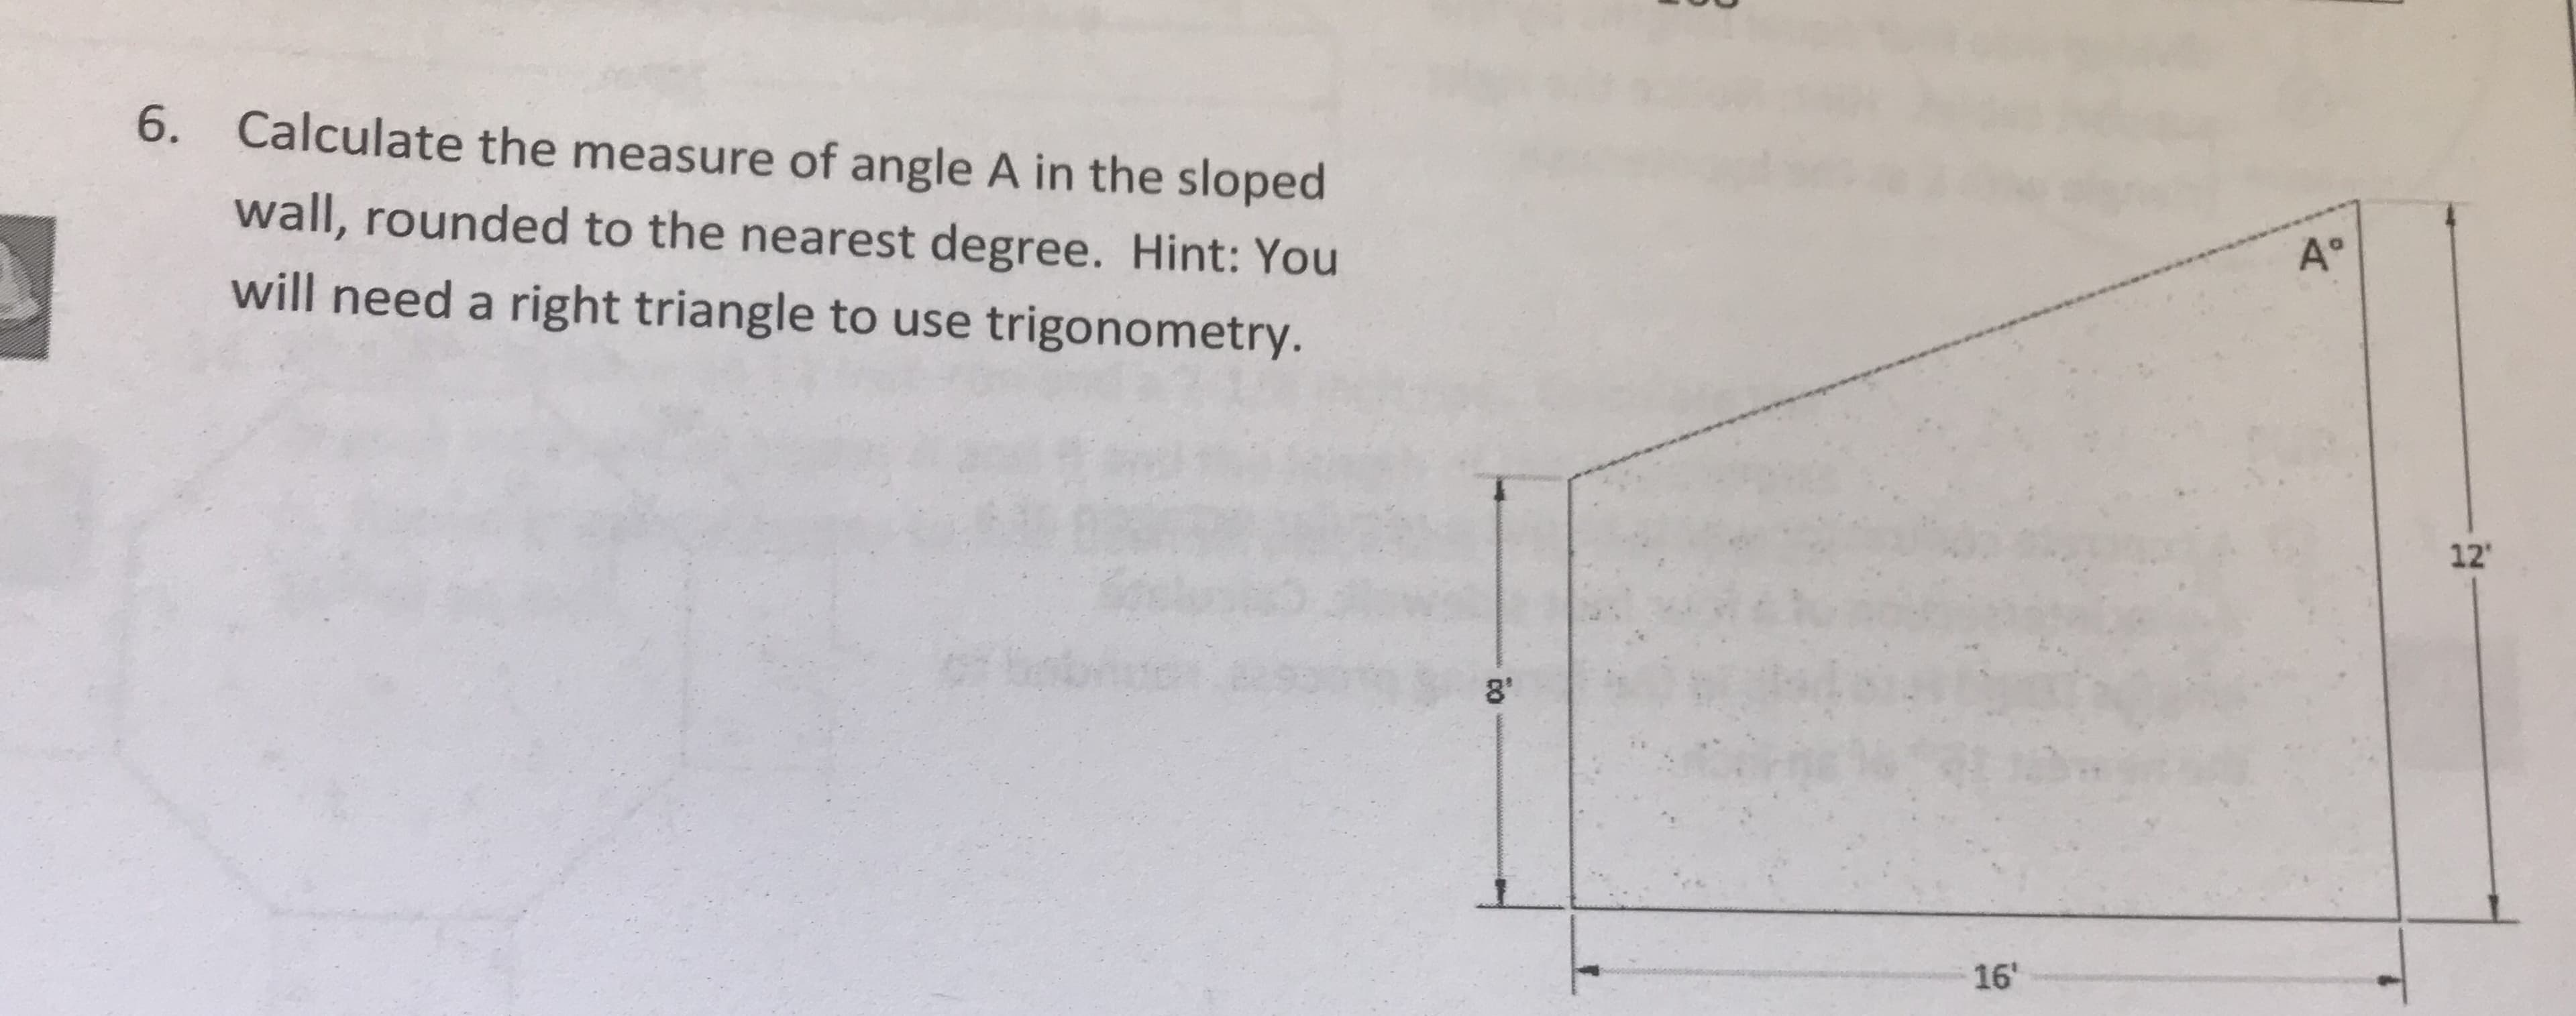 6. Calculate the measure of angle A in the sloped
wall, rounded to the nearest degree. Hint: You
will need a right triangle to use trigonometry.
12
8"
16'
